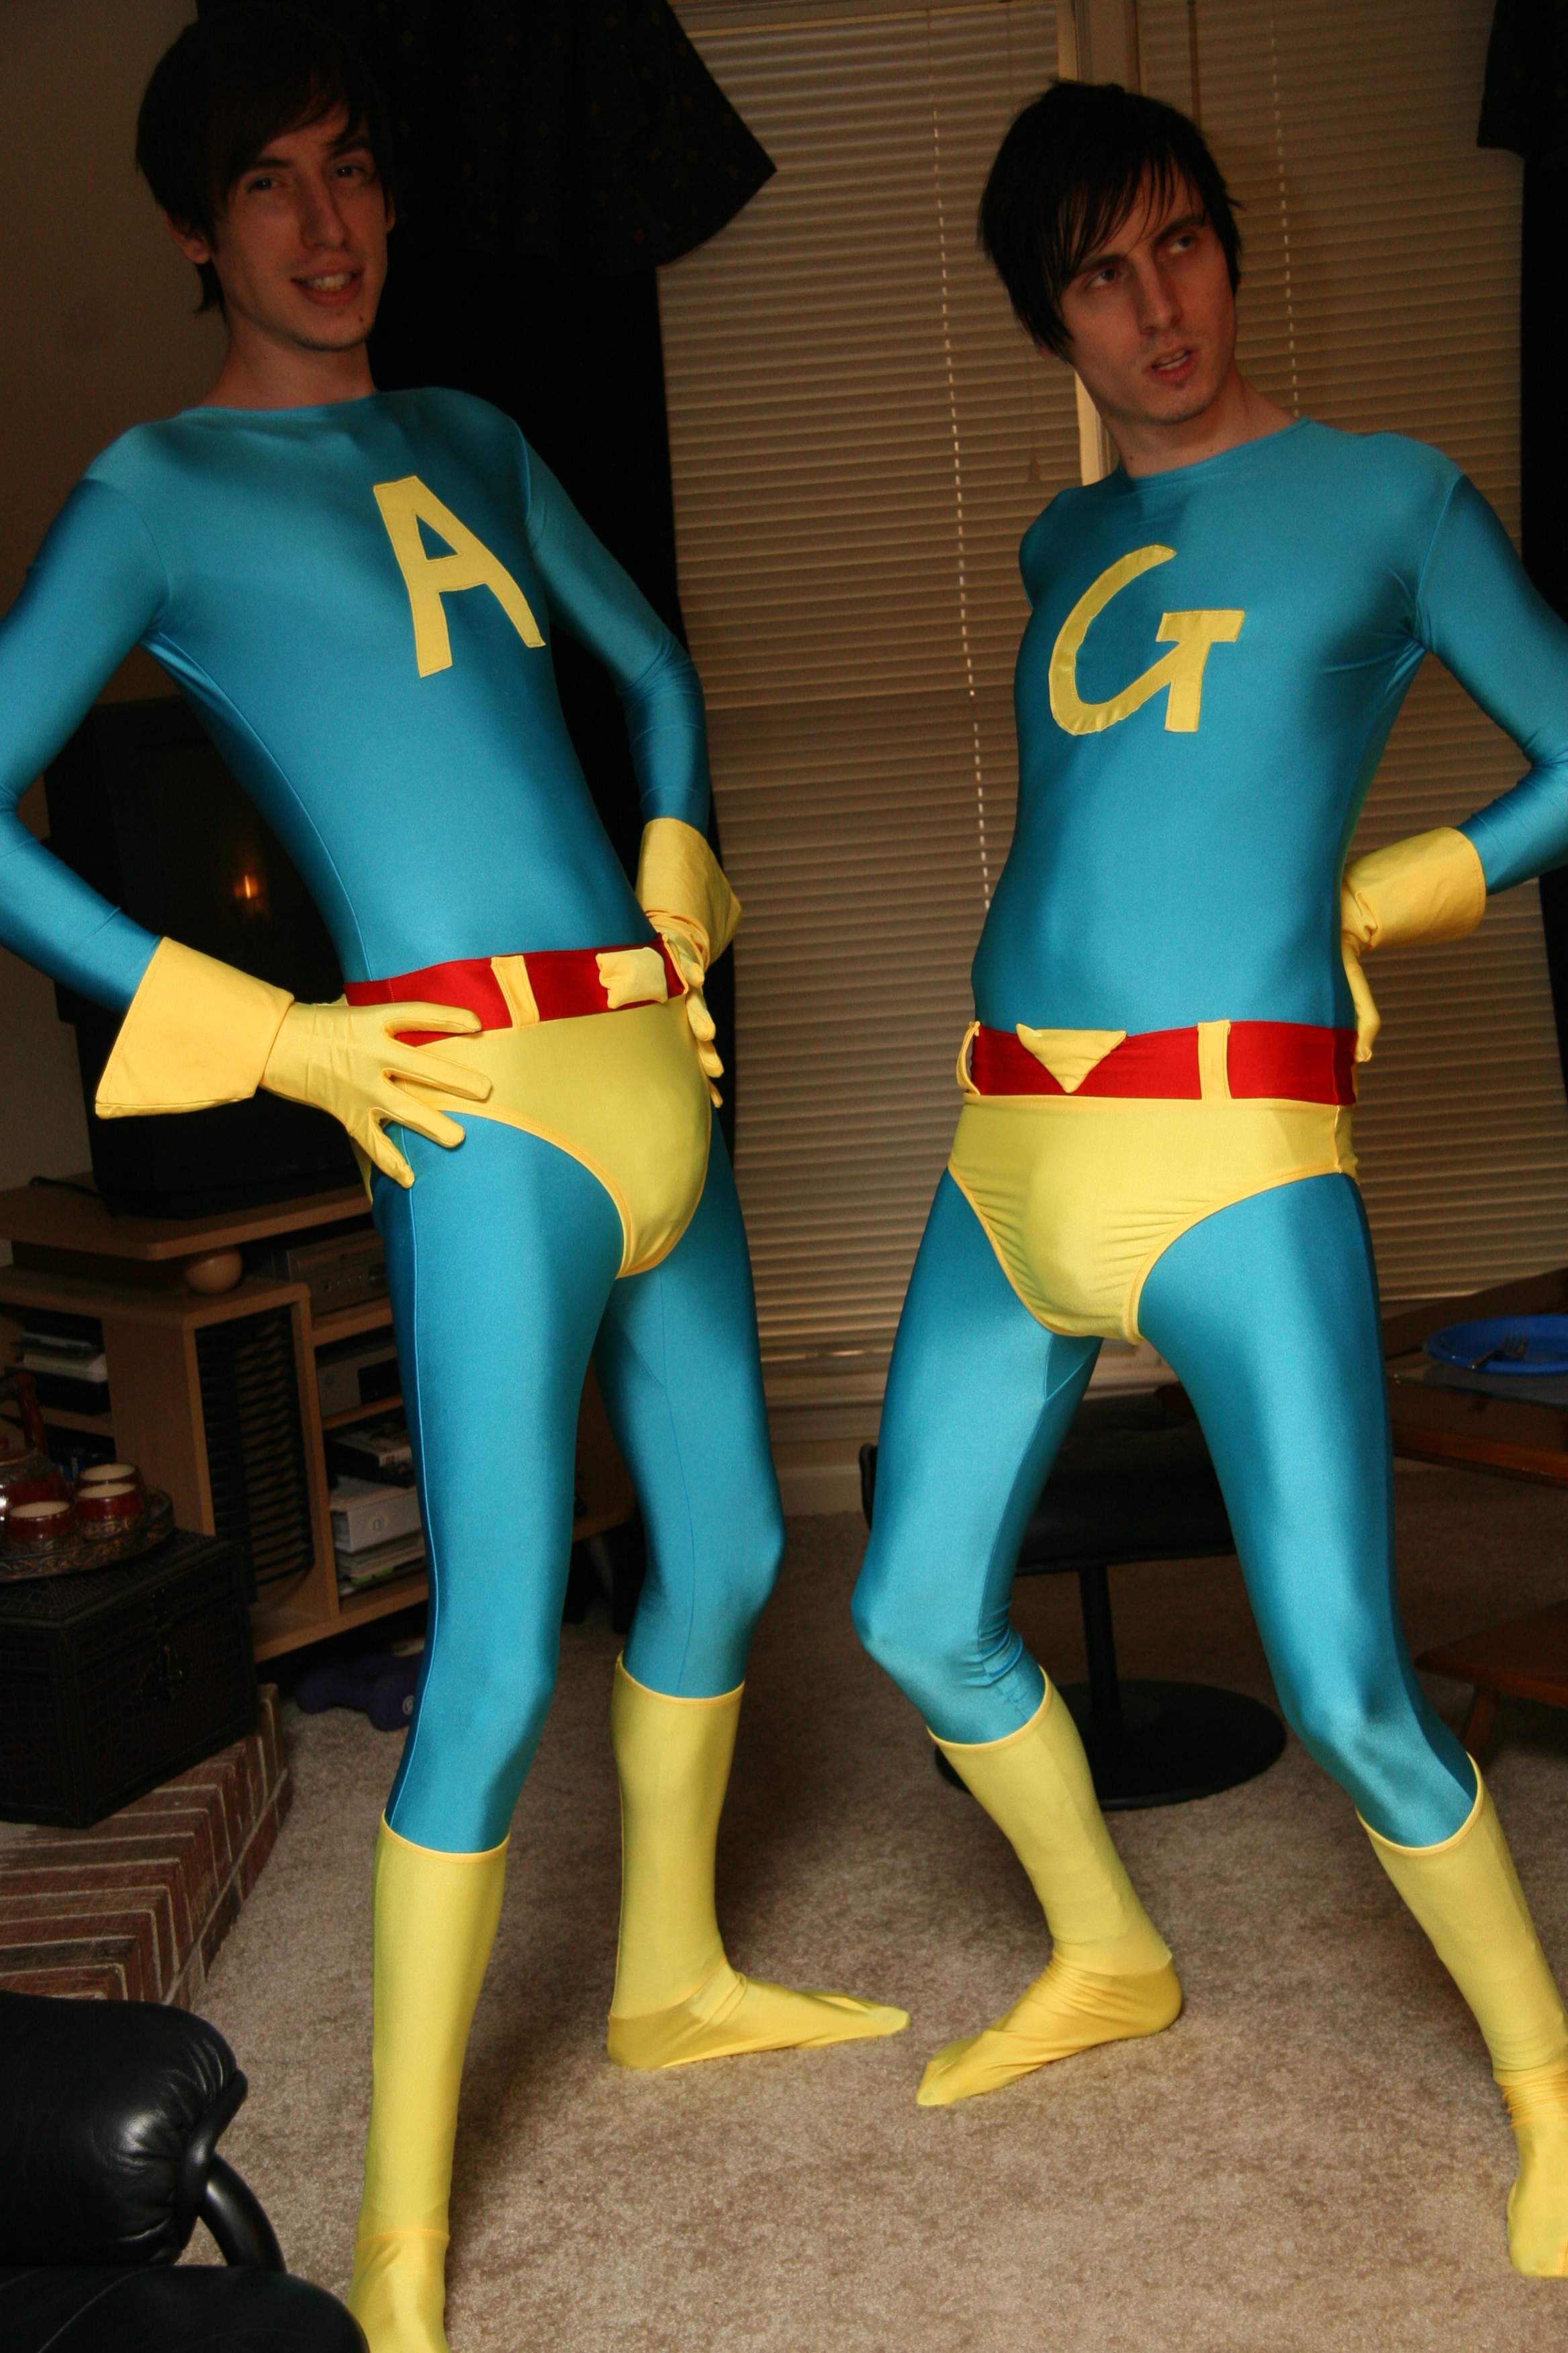 One of my first costumes - Ace and Gary from the Ambiguously Gay Duo.  I was Gary.  Haha.